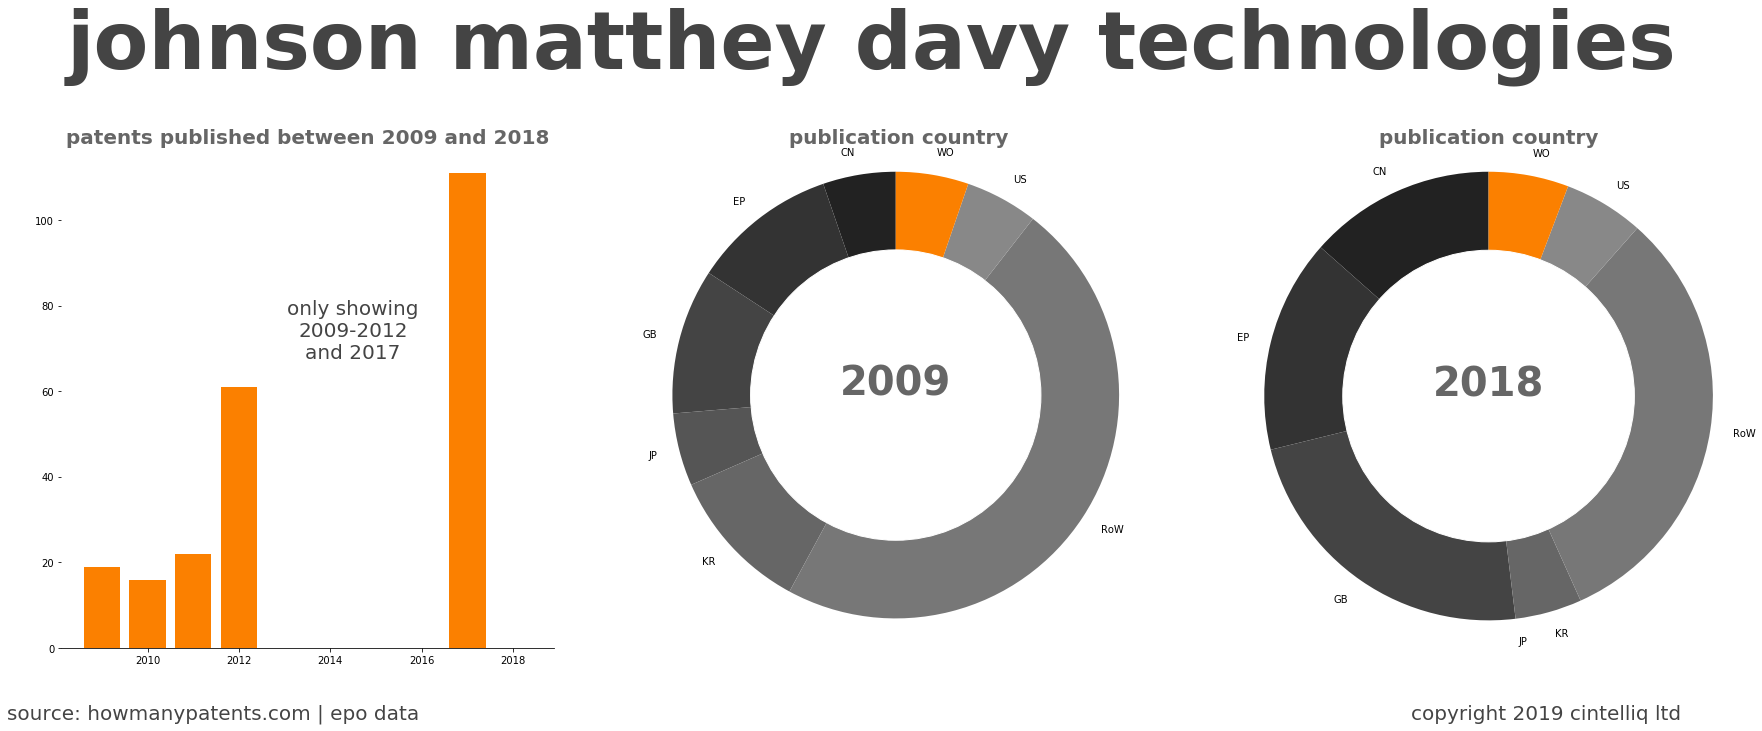 summary of patents for Johnson Matthey Davy Technologies